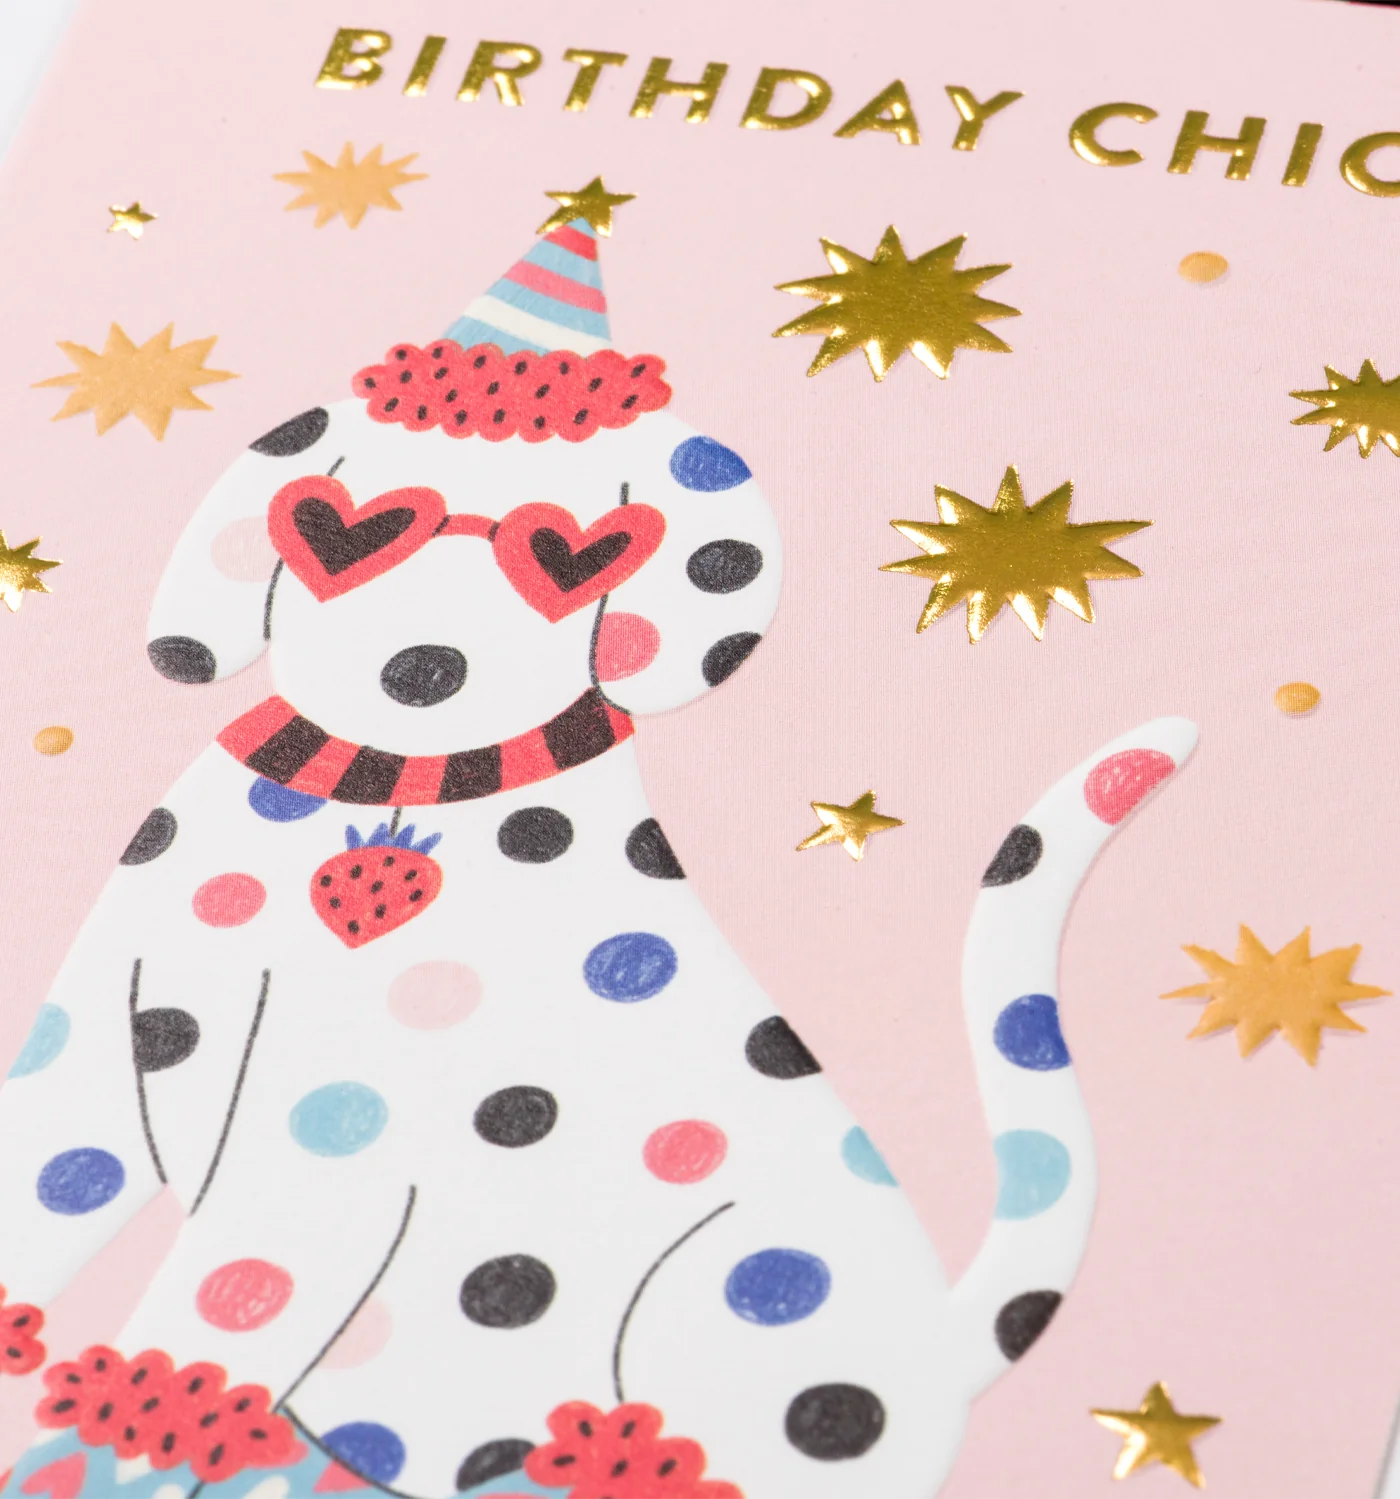 Pattern Party Pup in Birthday Chic Birthday Card